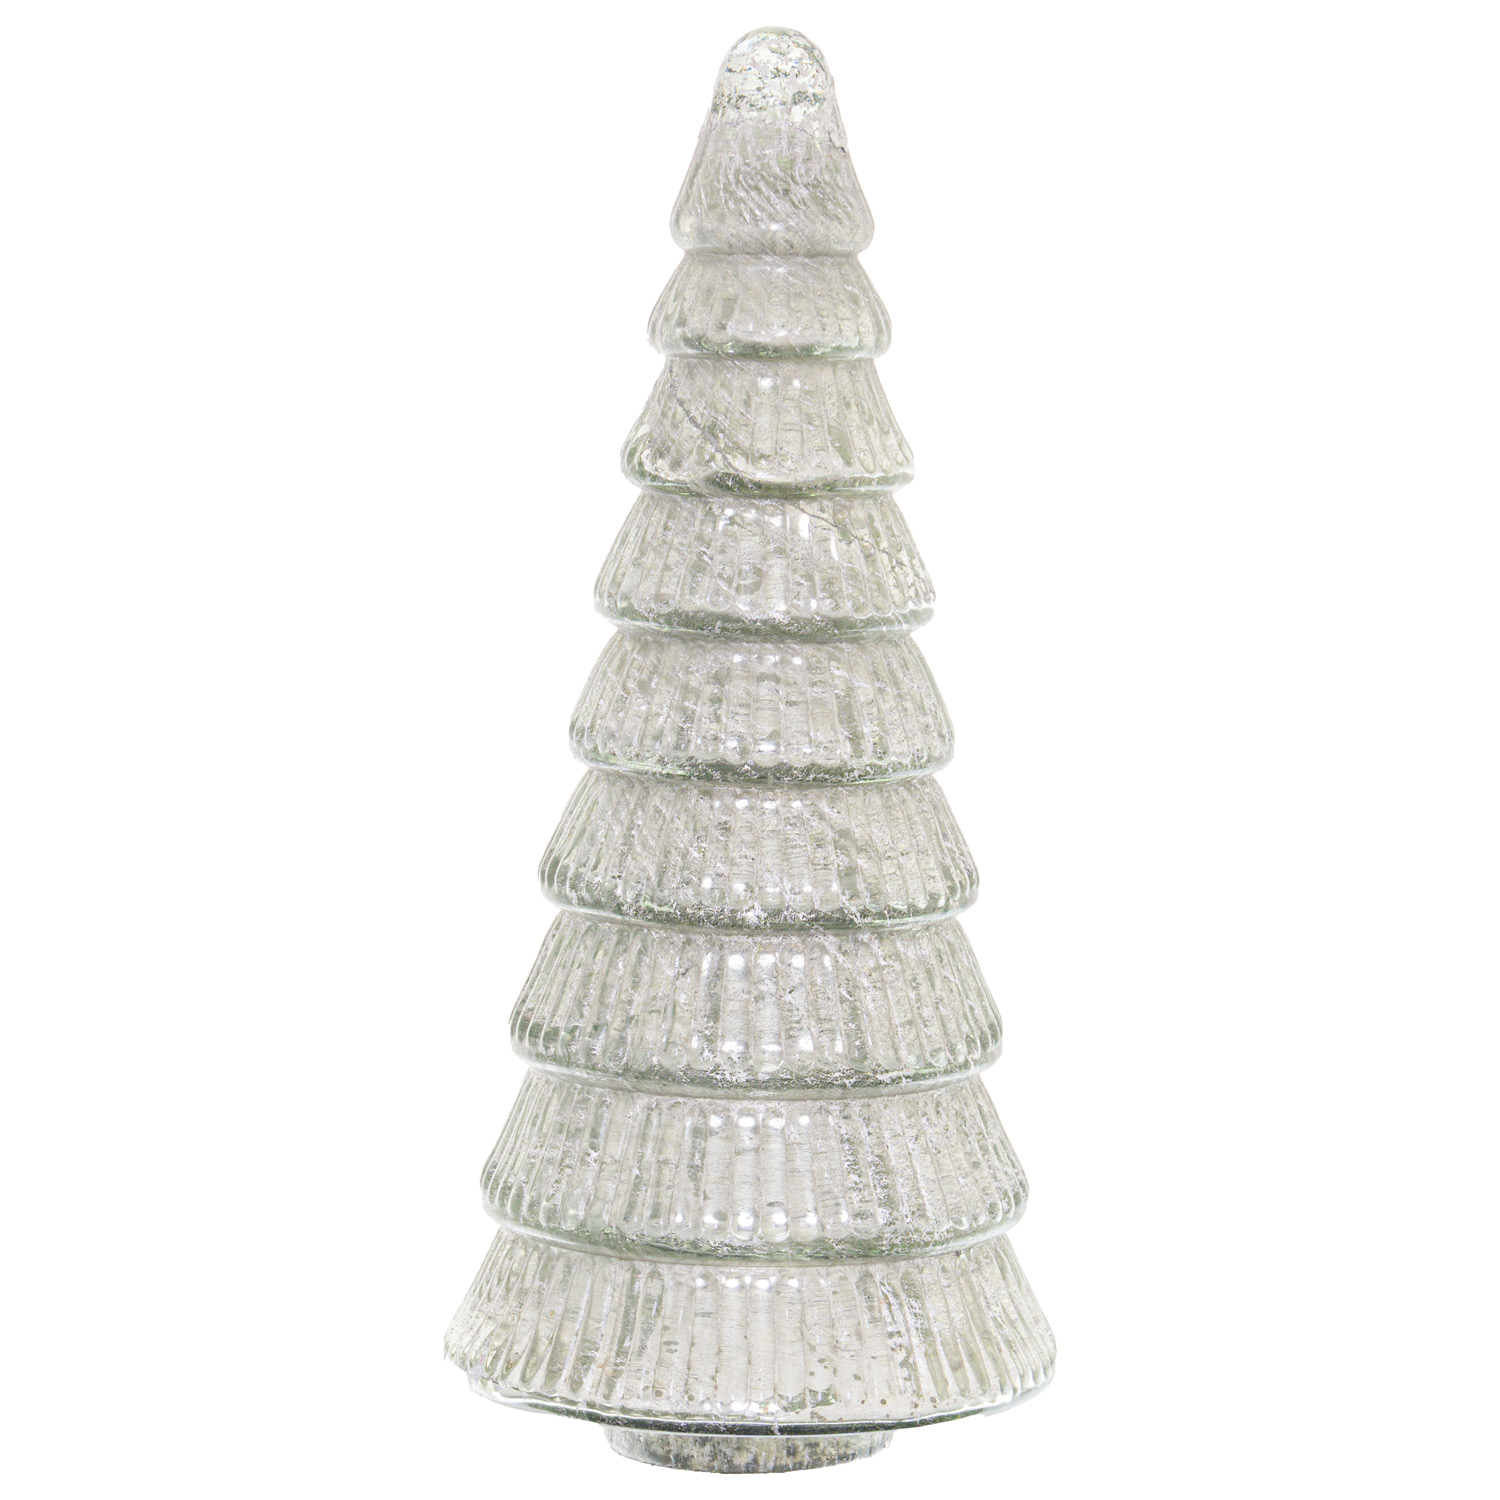 The Noel Collection Tiered Decorative Large Glass Tree - Image 1